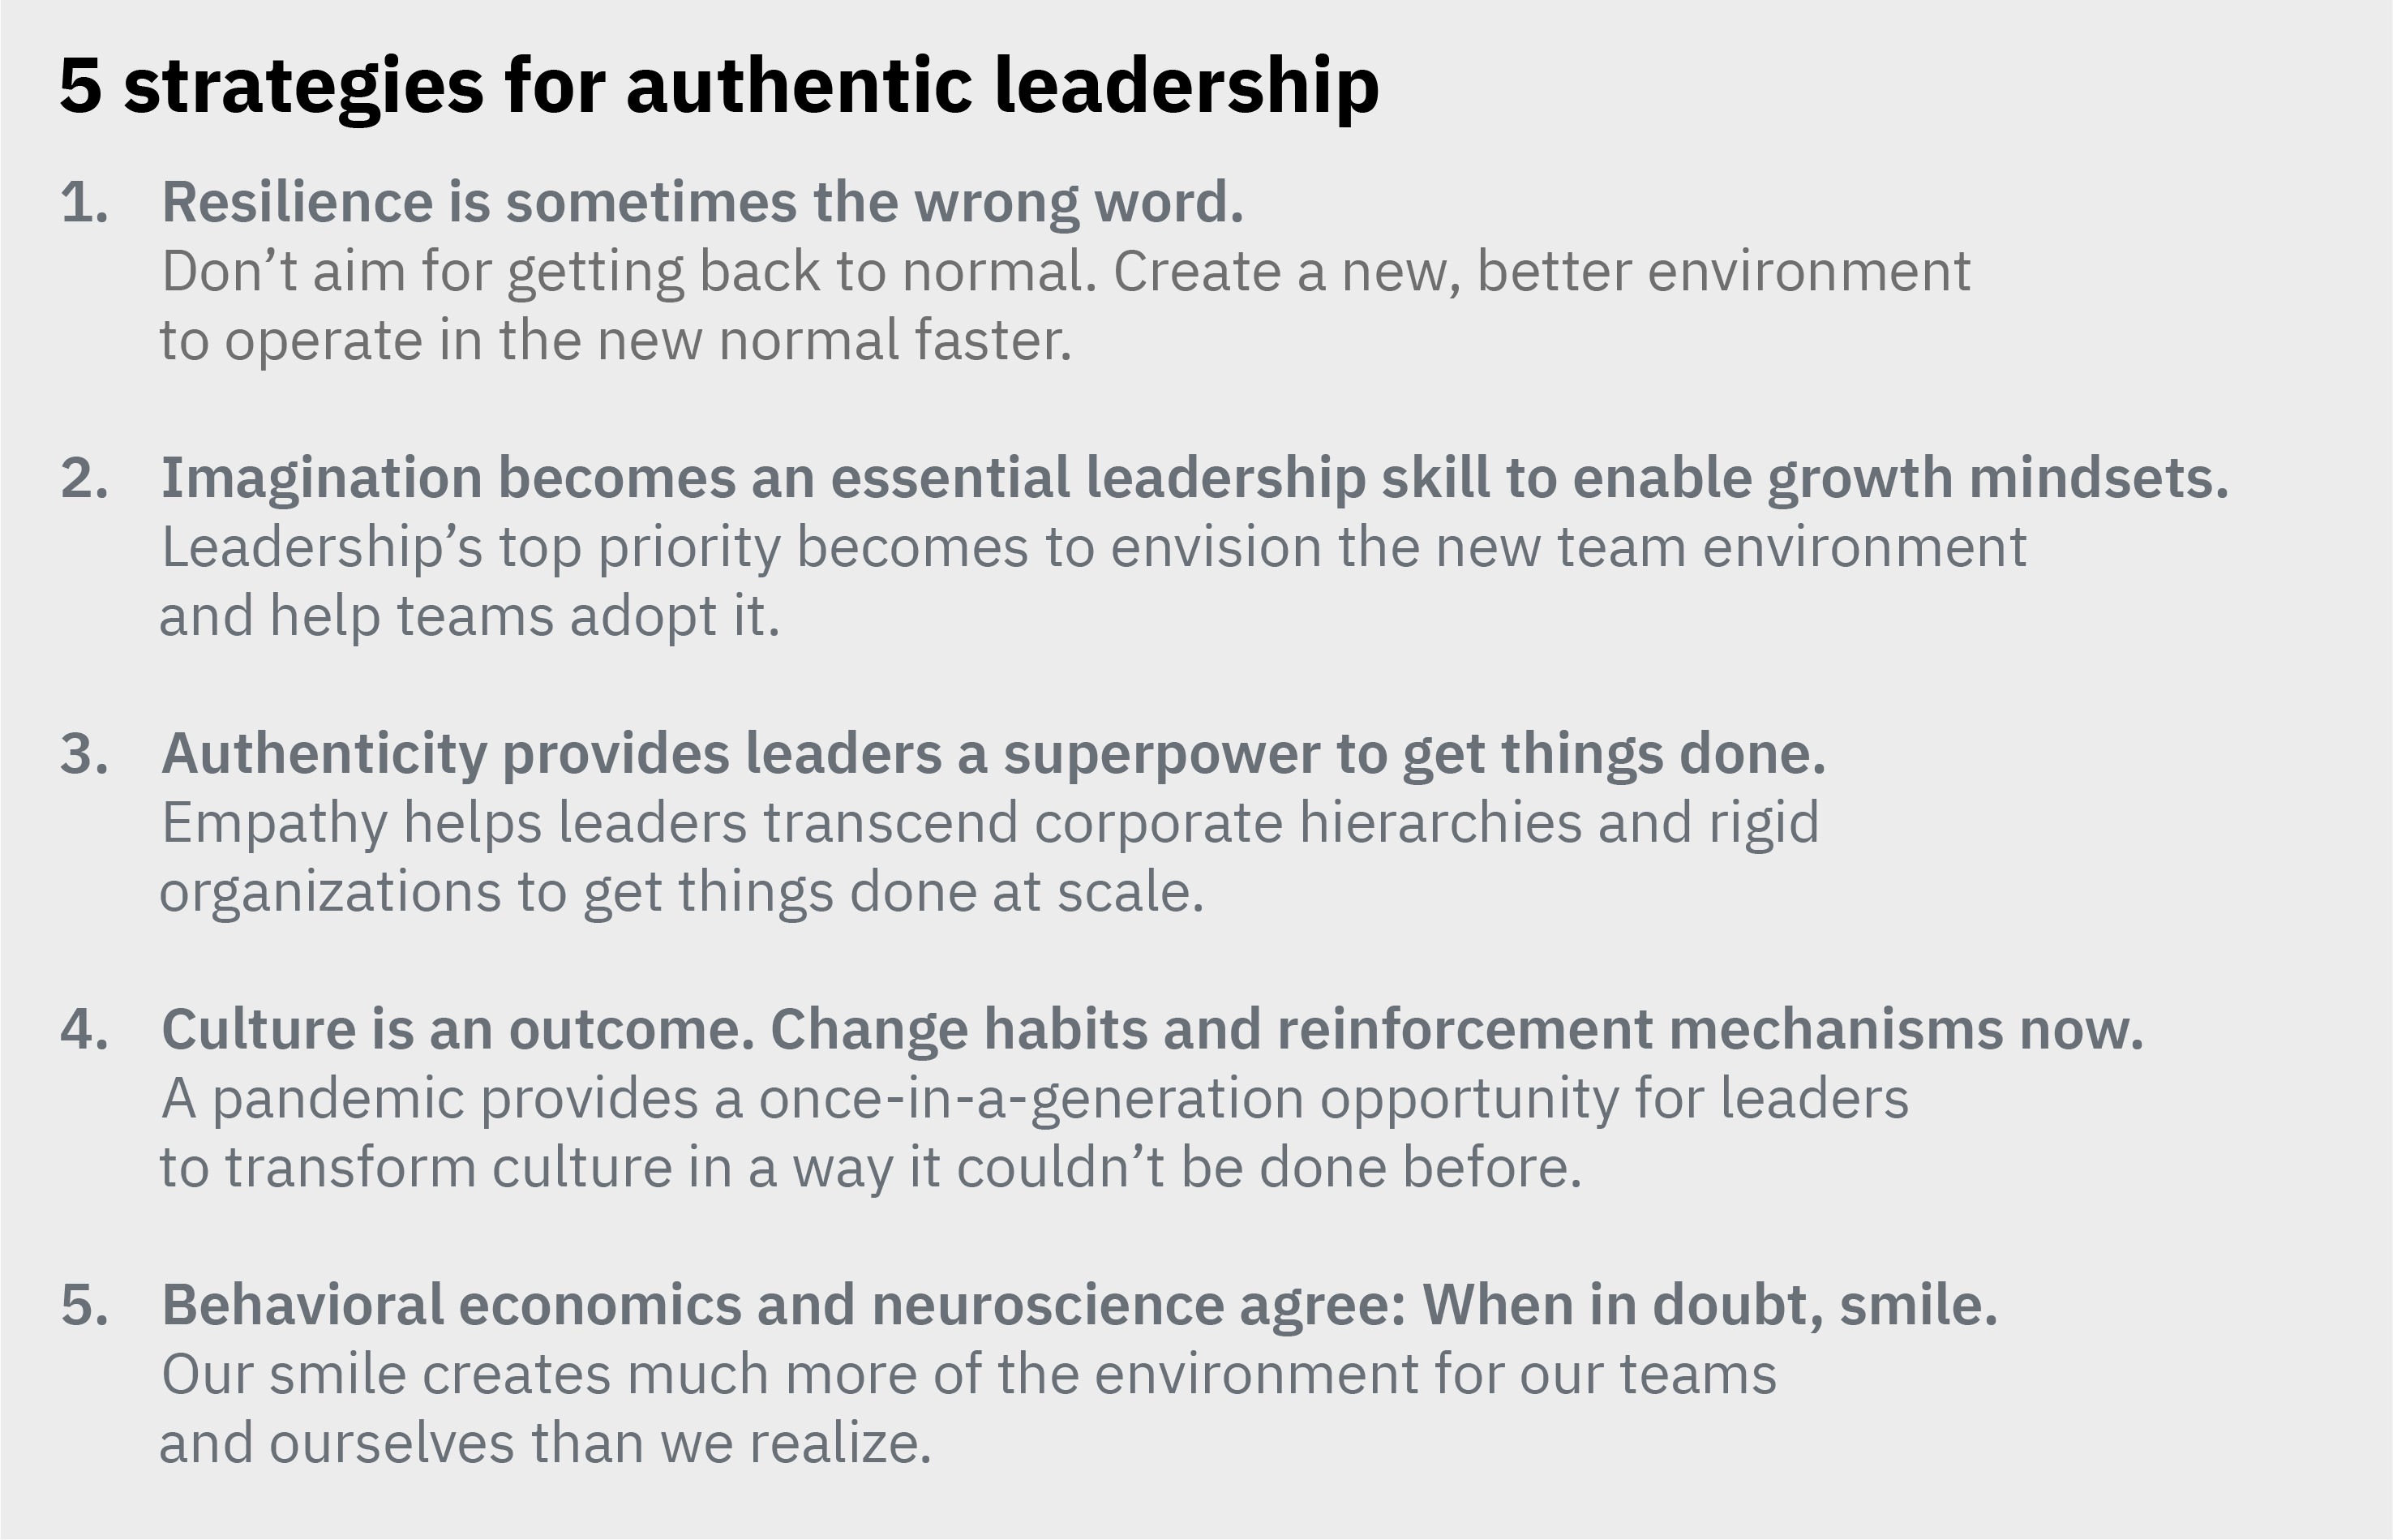 5 strategies for authentic leadership